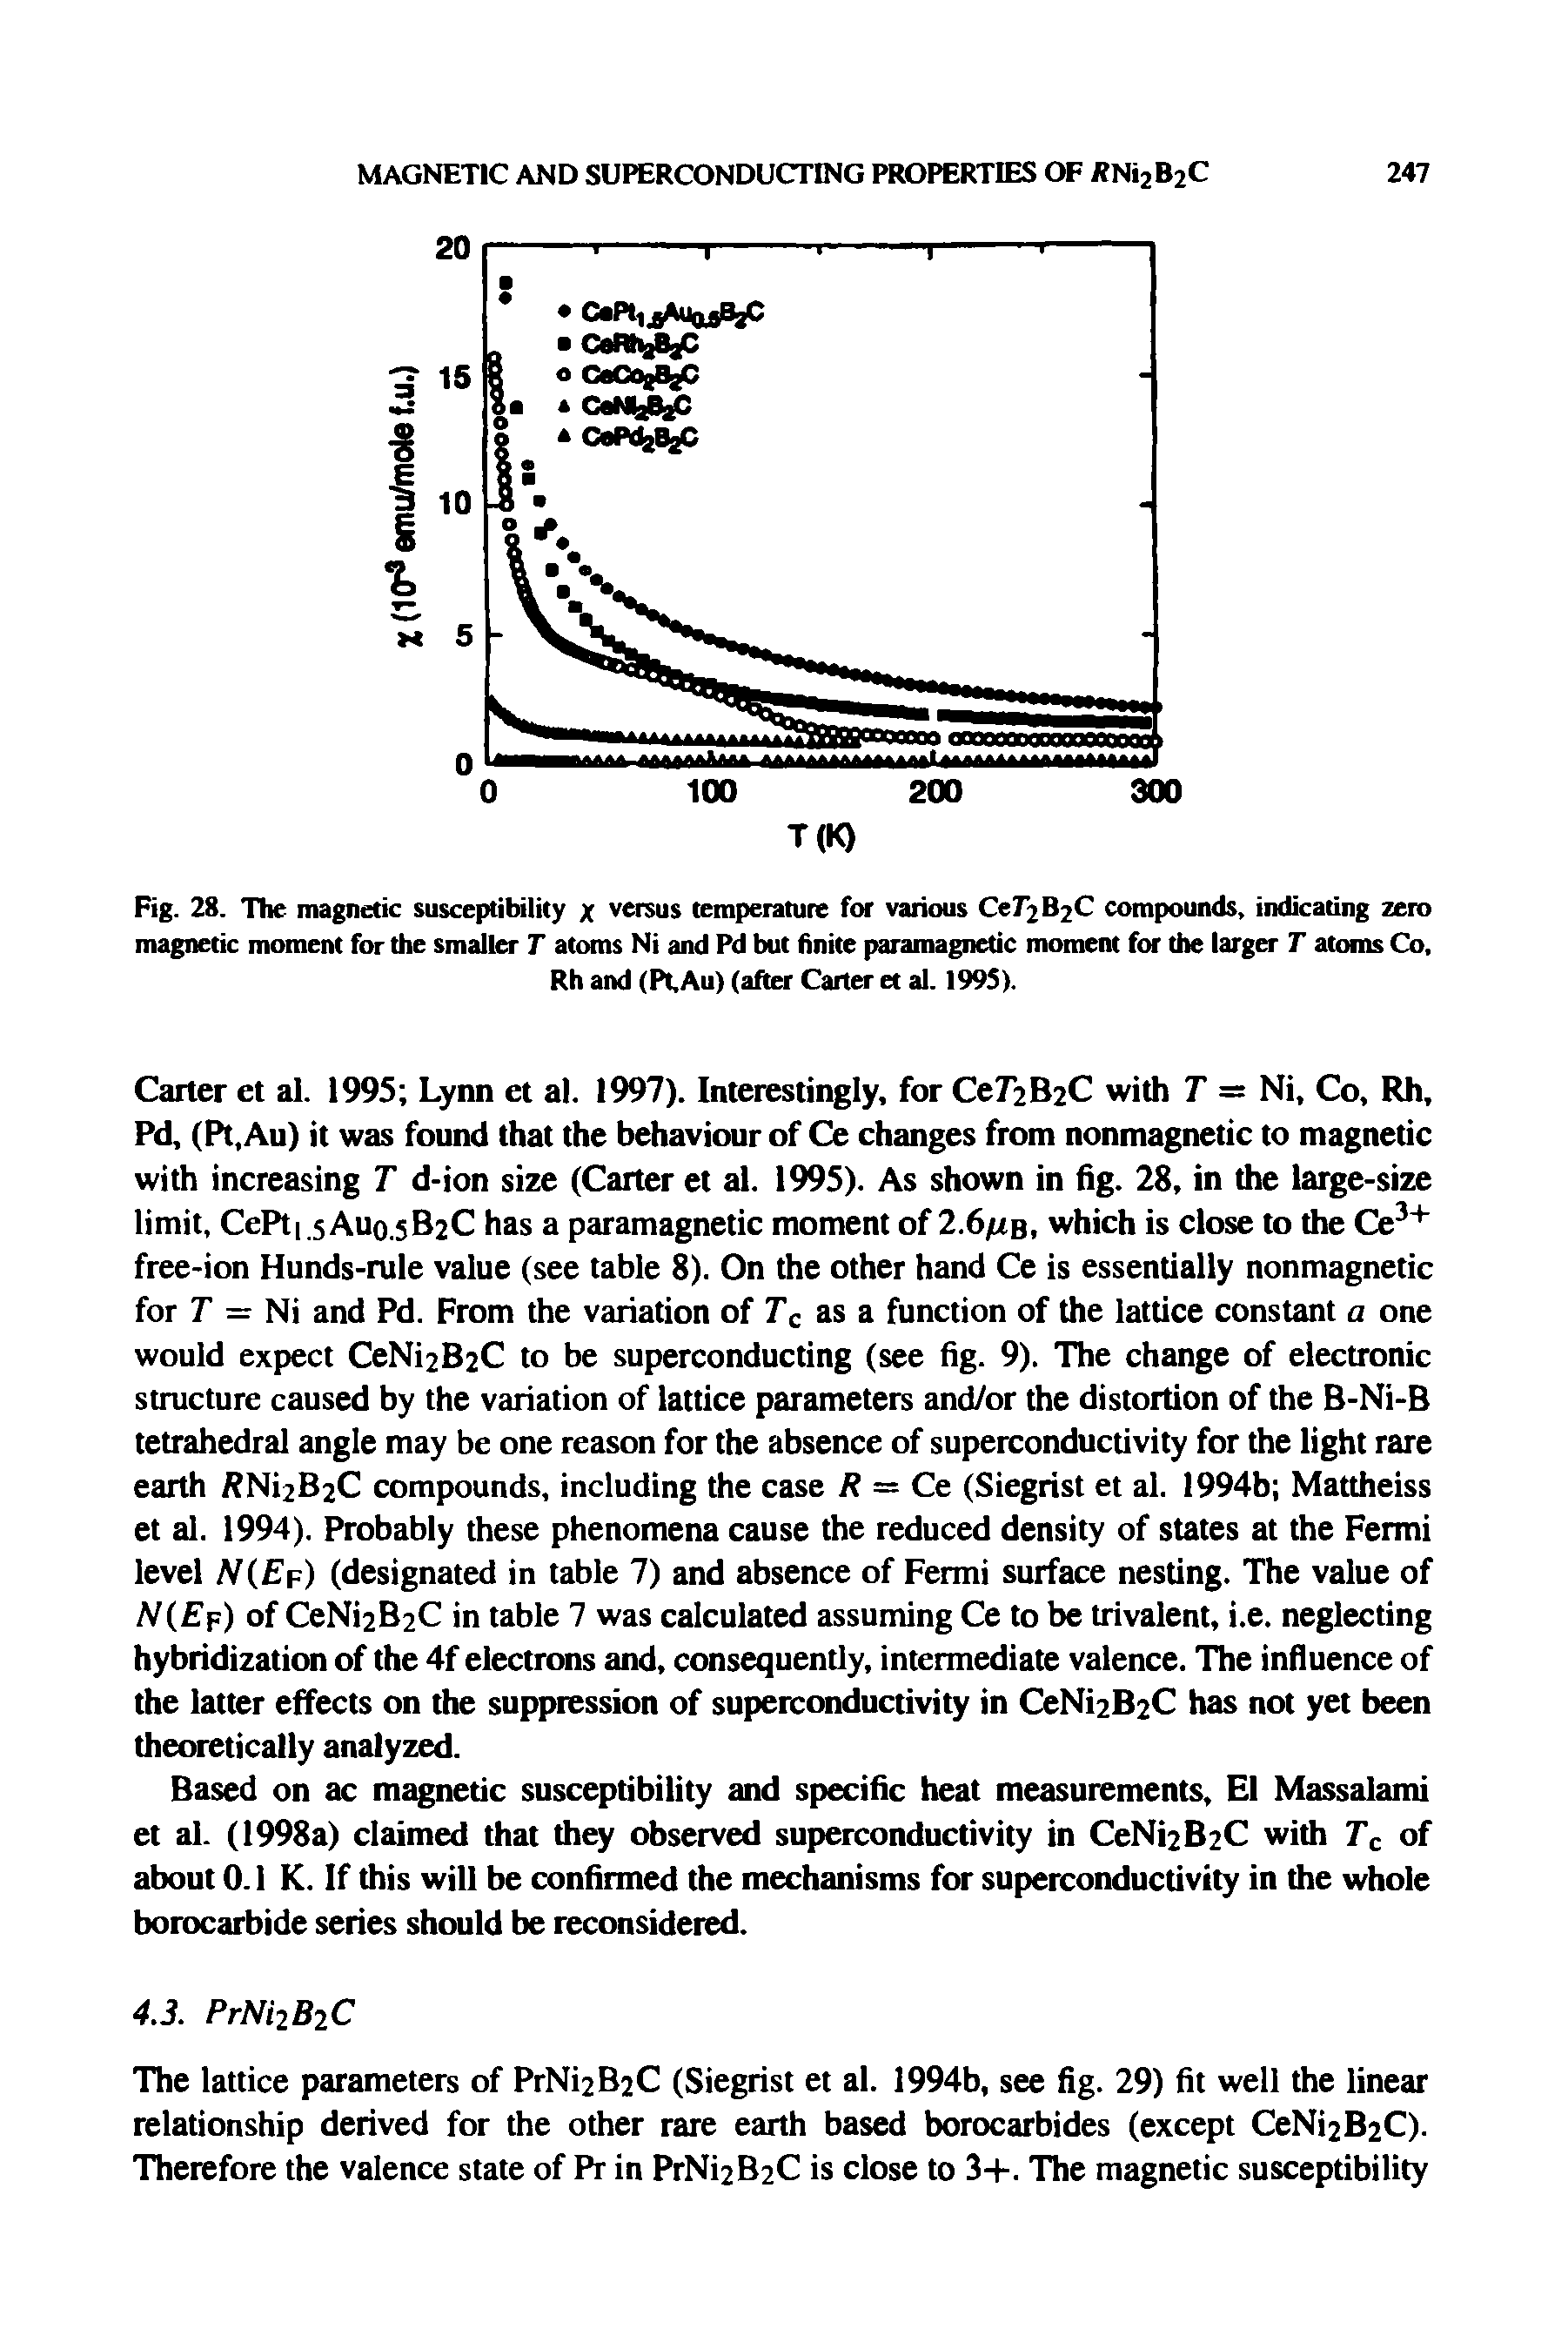 Fig. 28. The magnetic susceptibility x versus temperature for various CeT2B2C compounds, indicating zero magnetic moment for the smaller T atoms Ni and Pd but finite paramagnetic moment for the larger T atoms Co,...